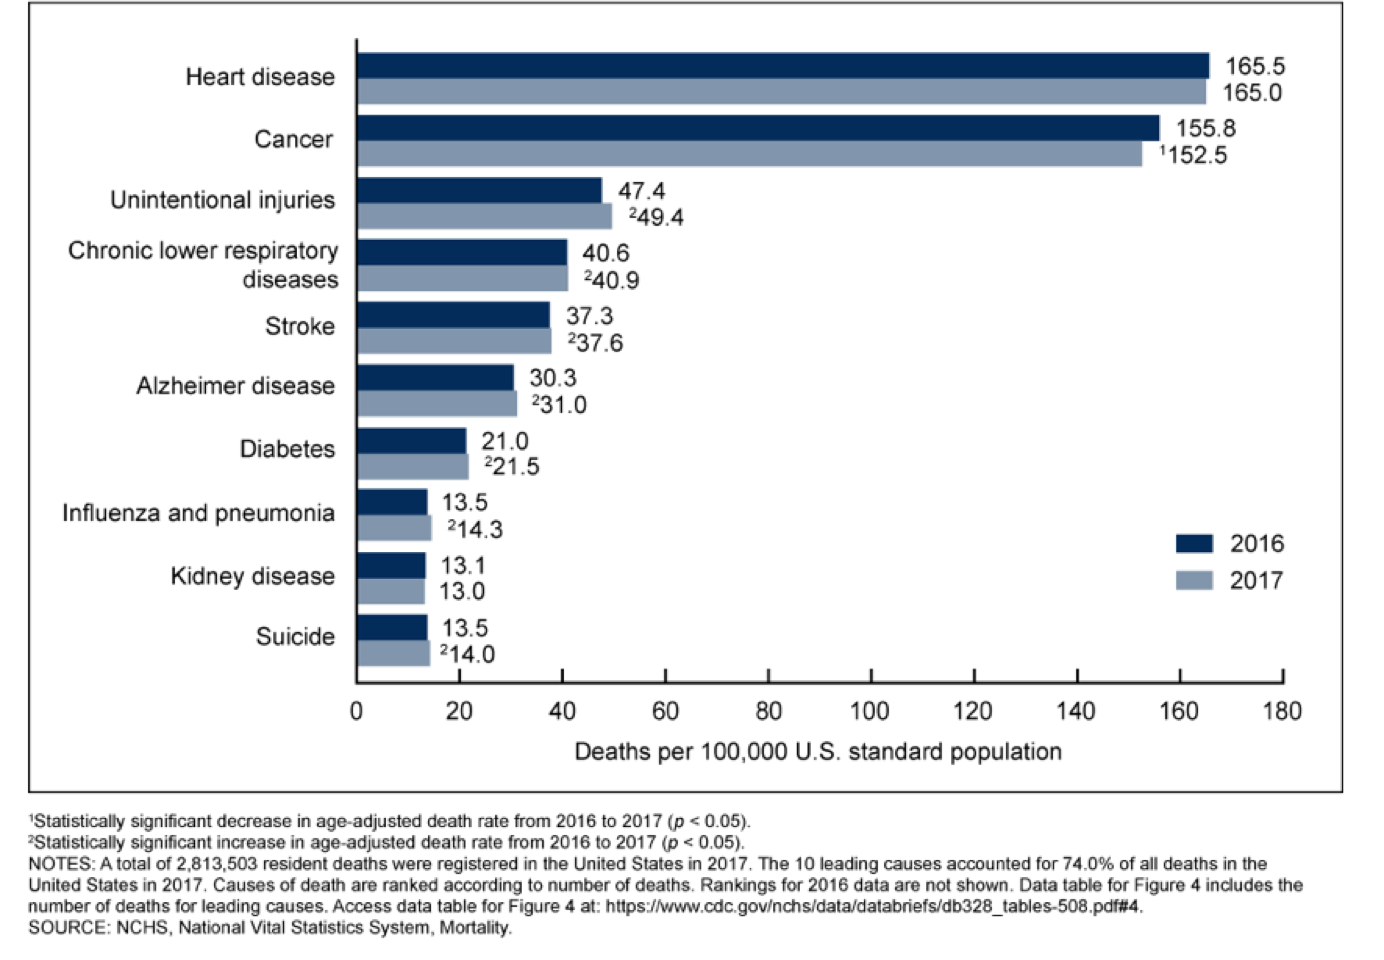 Age-adjusted death rates for the 10 leading causes of death